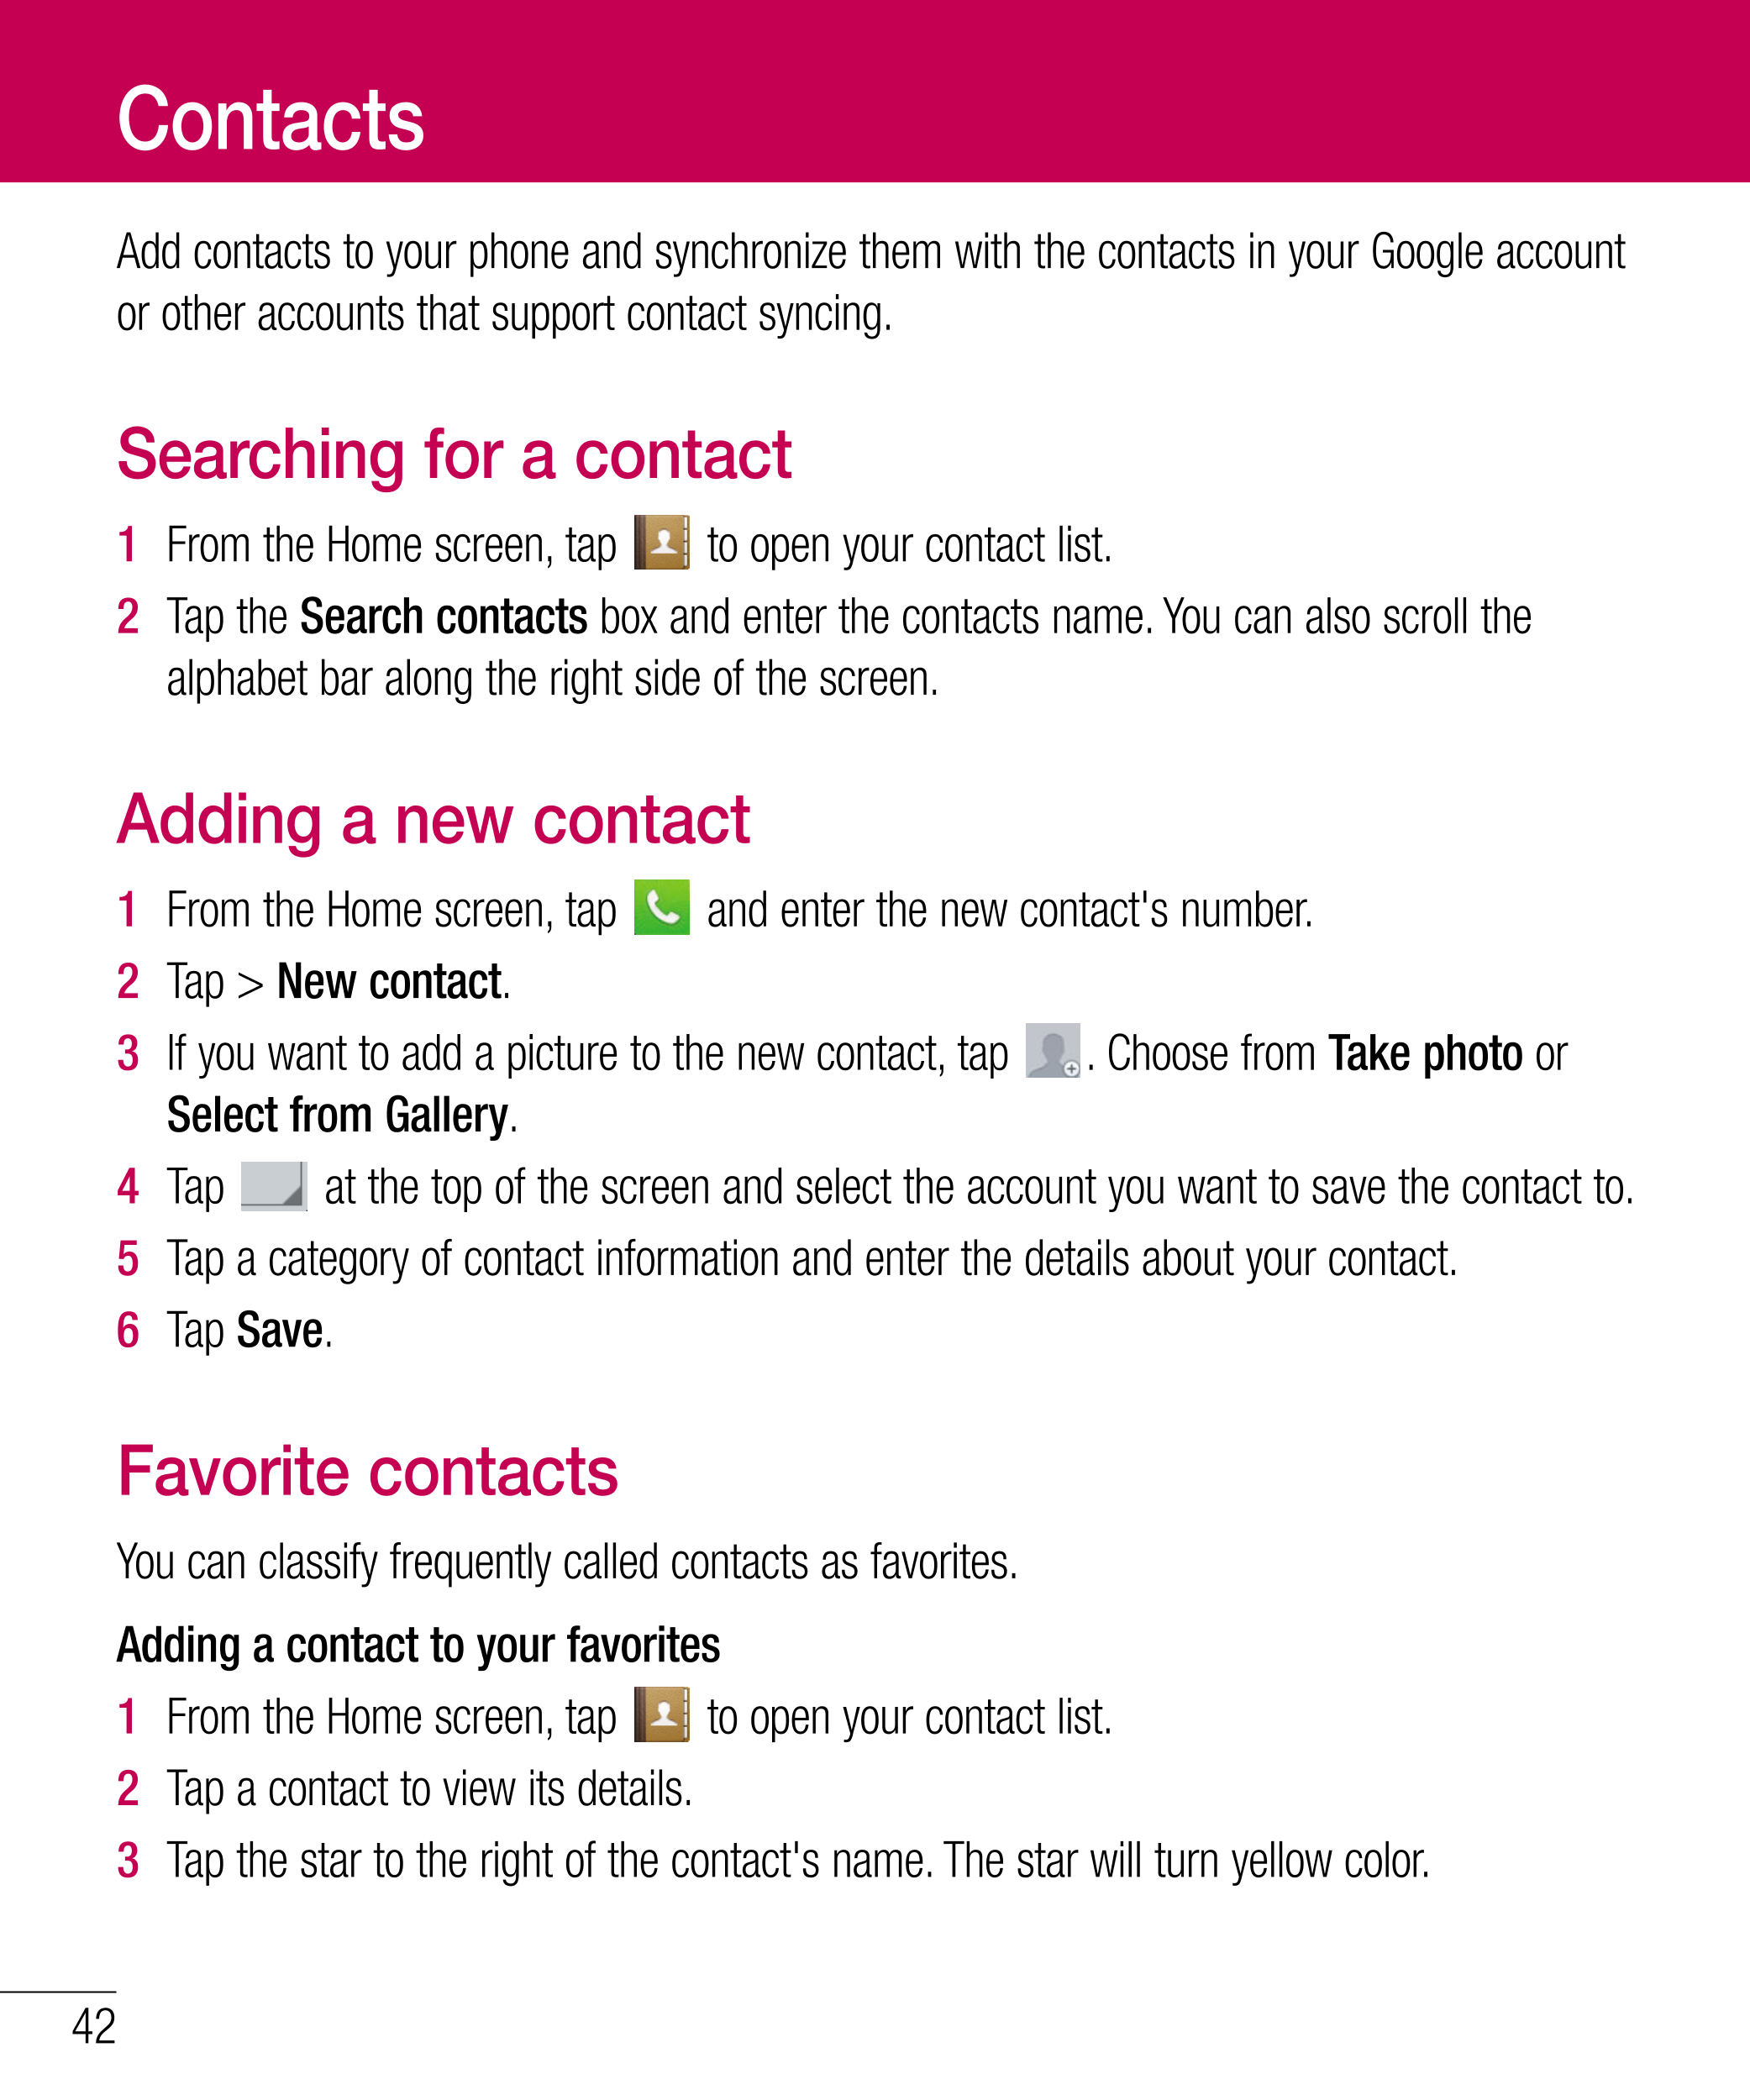 Contacts
Add contacts to your phone and synchronize them with the contacts in your Google account 
or other accounts that suppor